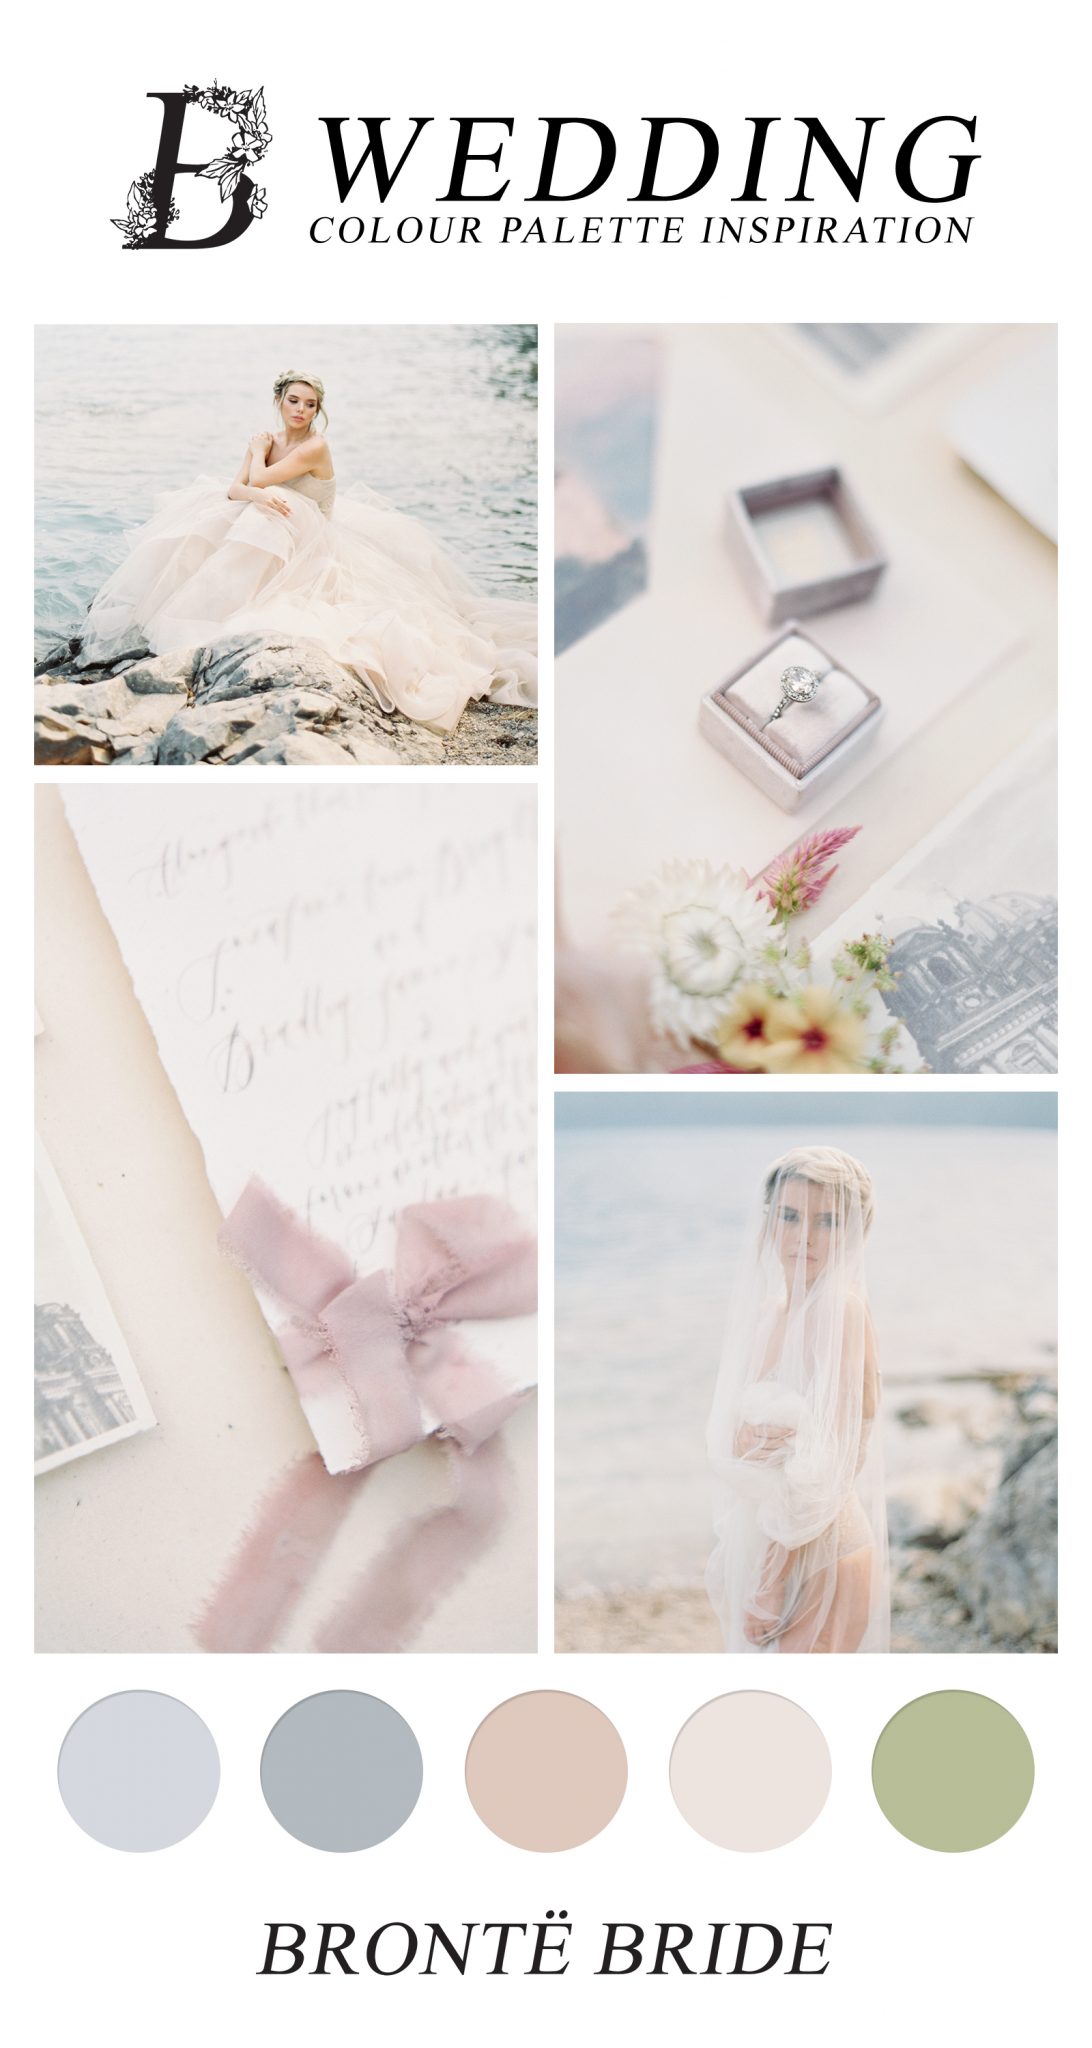 Modern Wedding Colour Palette Inspiration - Light & Airy - Pale blue and soft blush